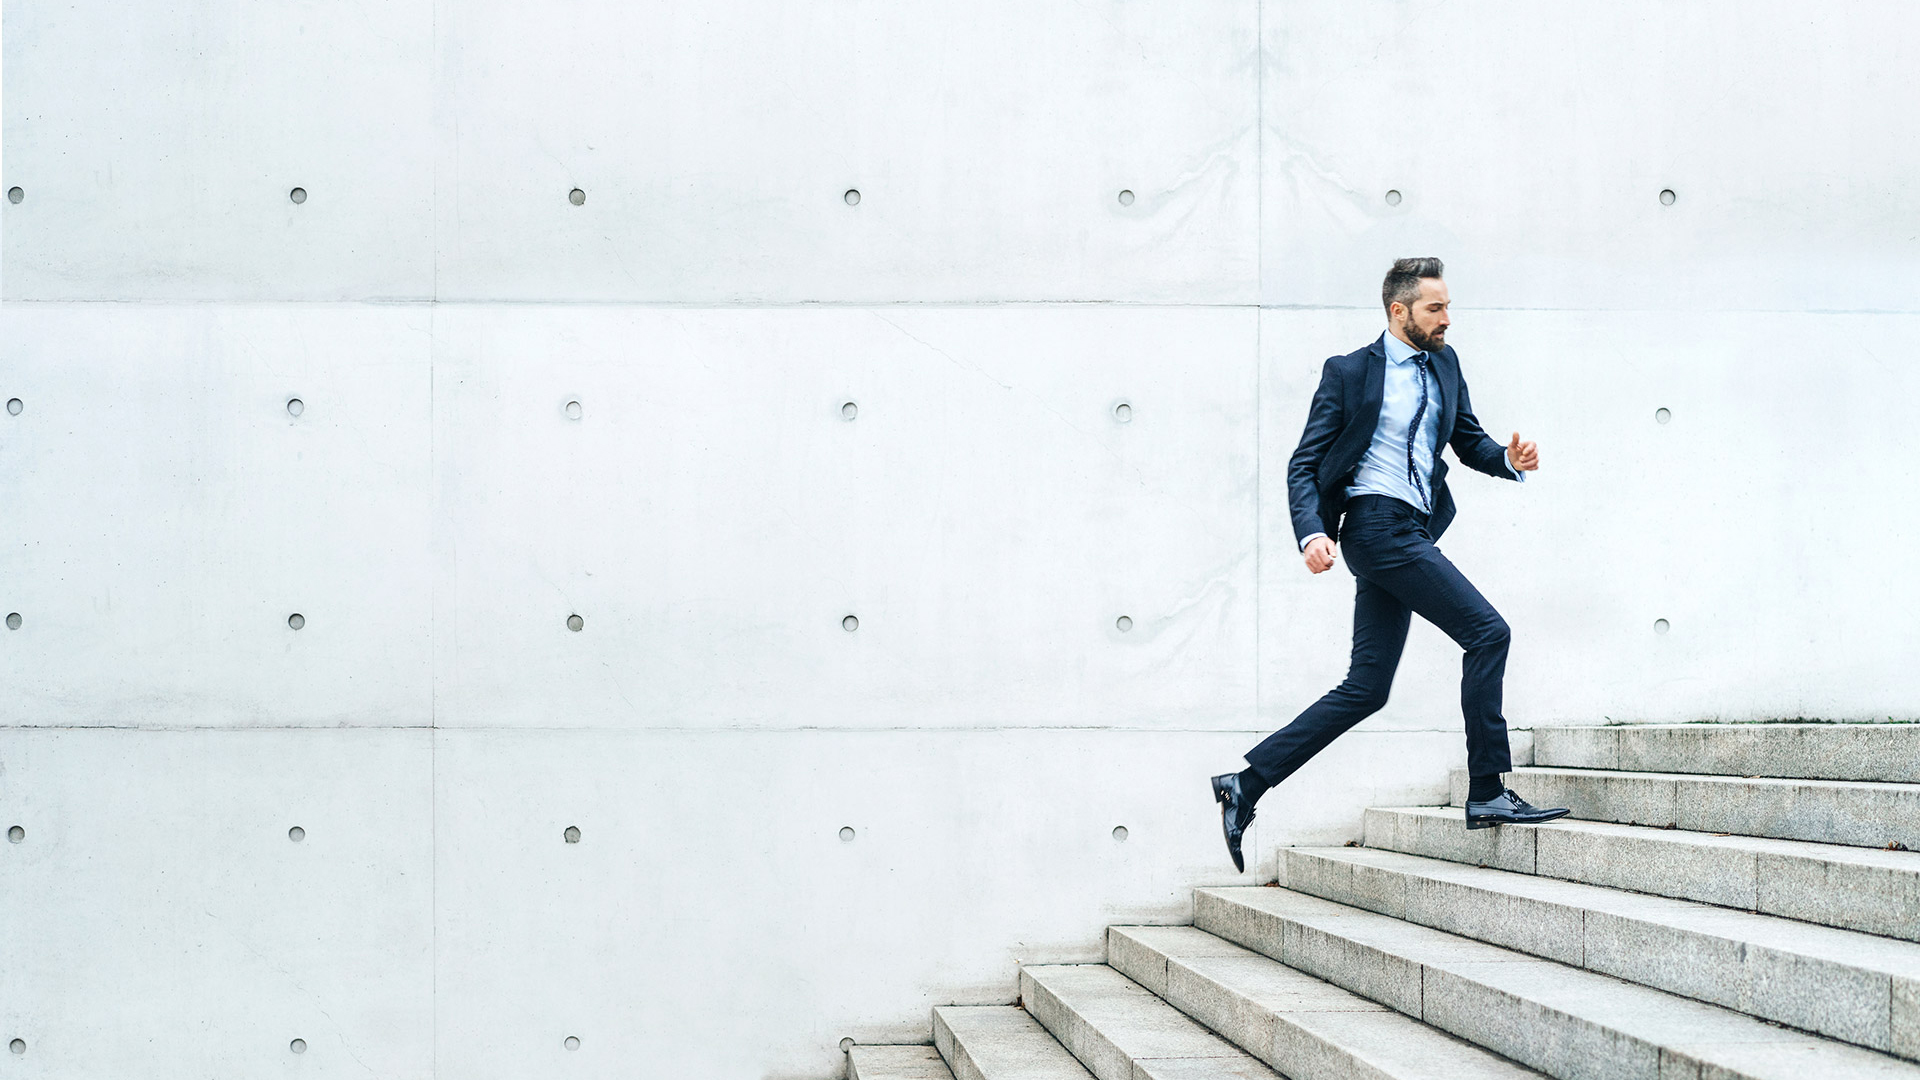 Man in suit running up stairs